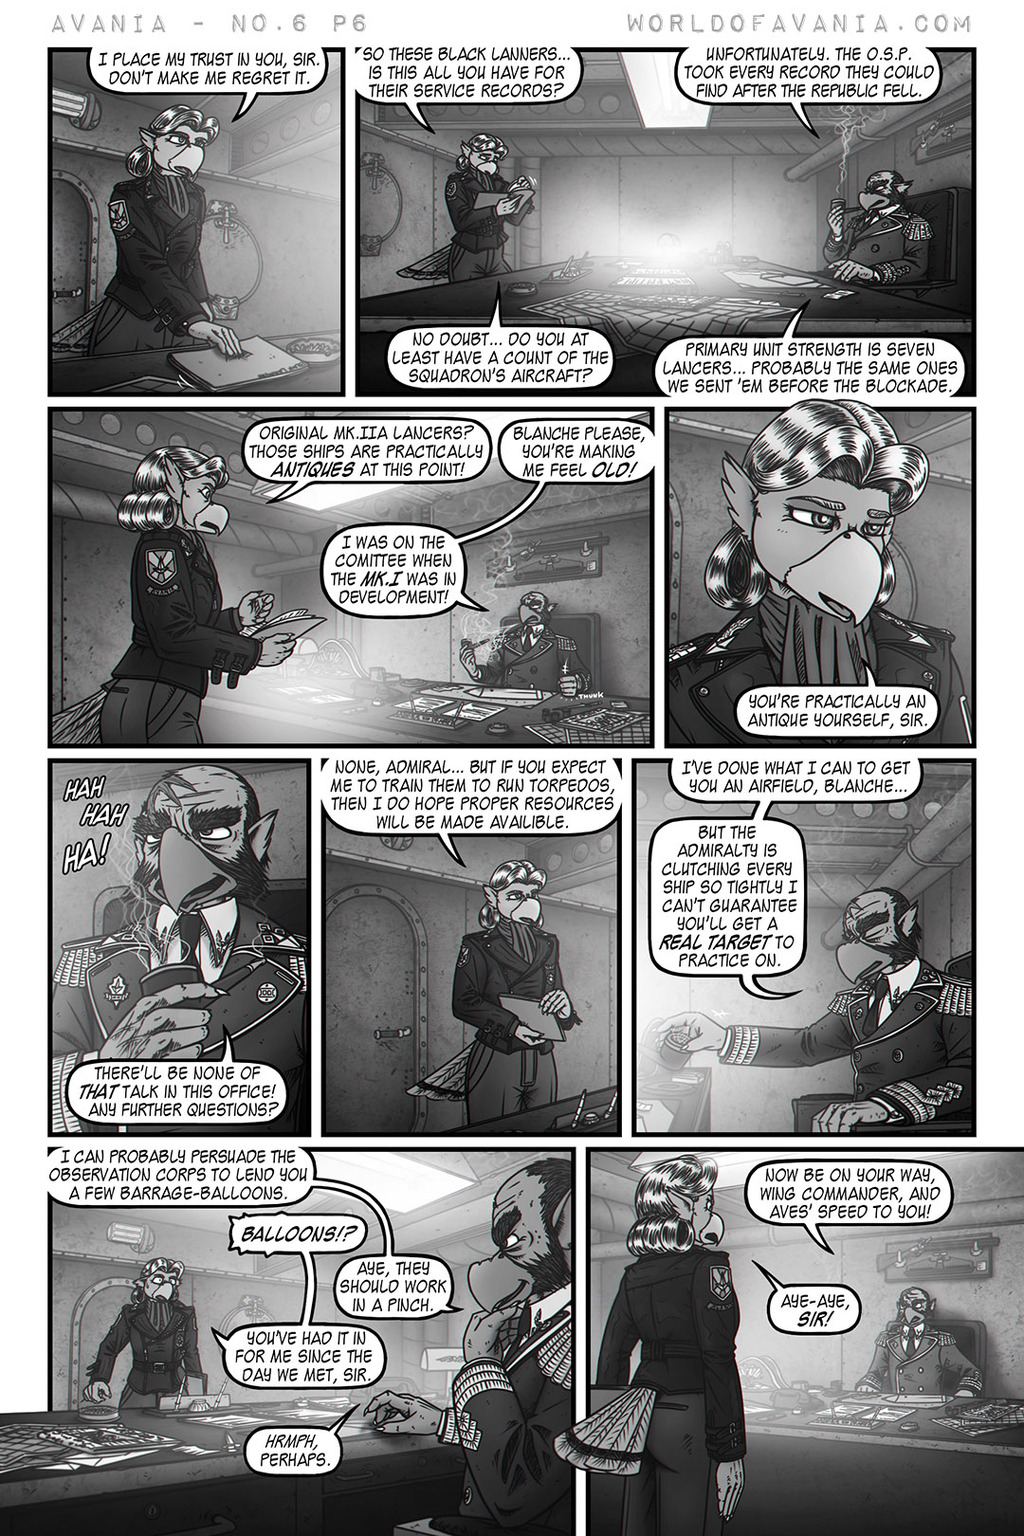 Avania Comic - Issue No.6, Page 6